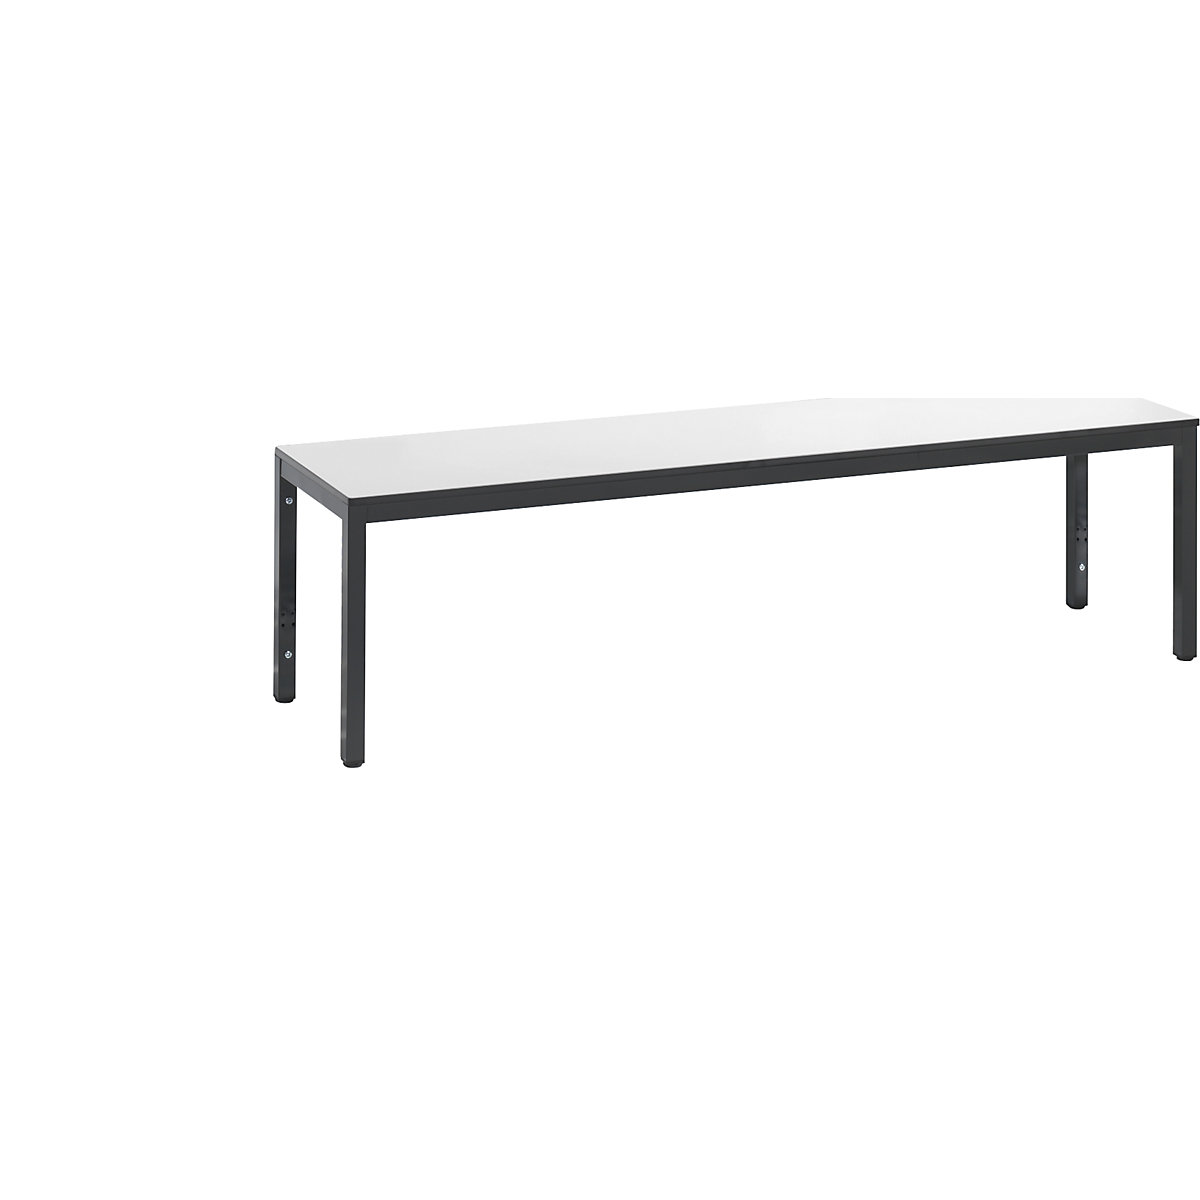 BASIC PLUS cloakroom bench – C+P, HPL seat surface, length 1500 mm, white-6